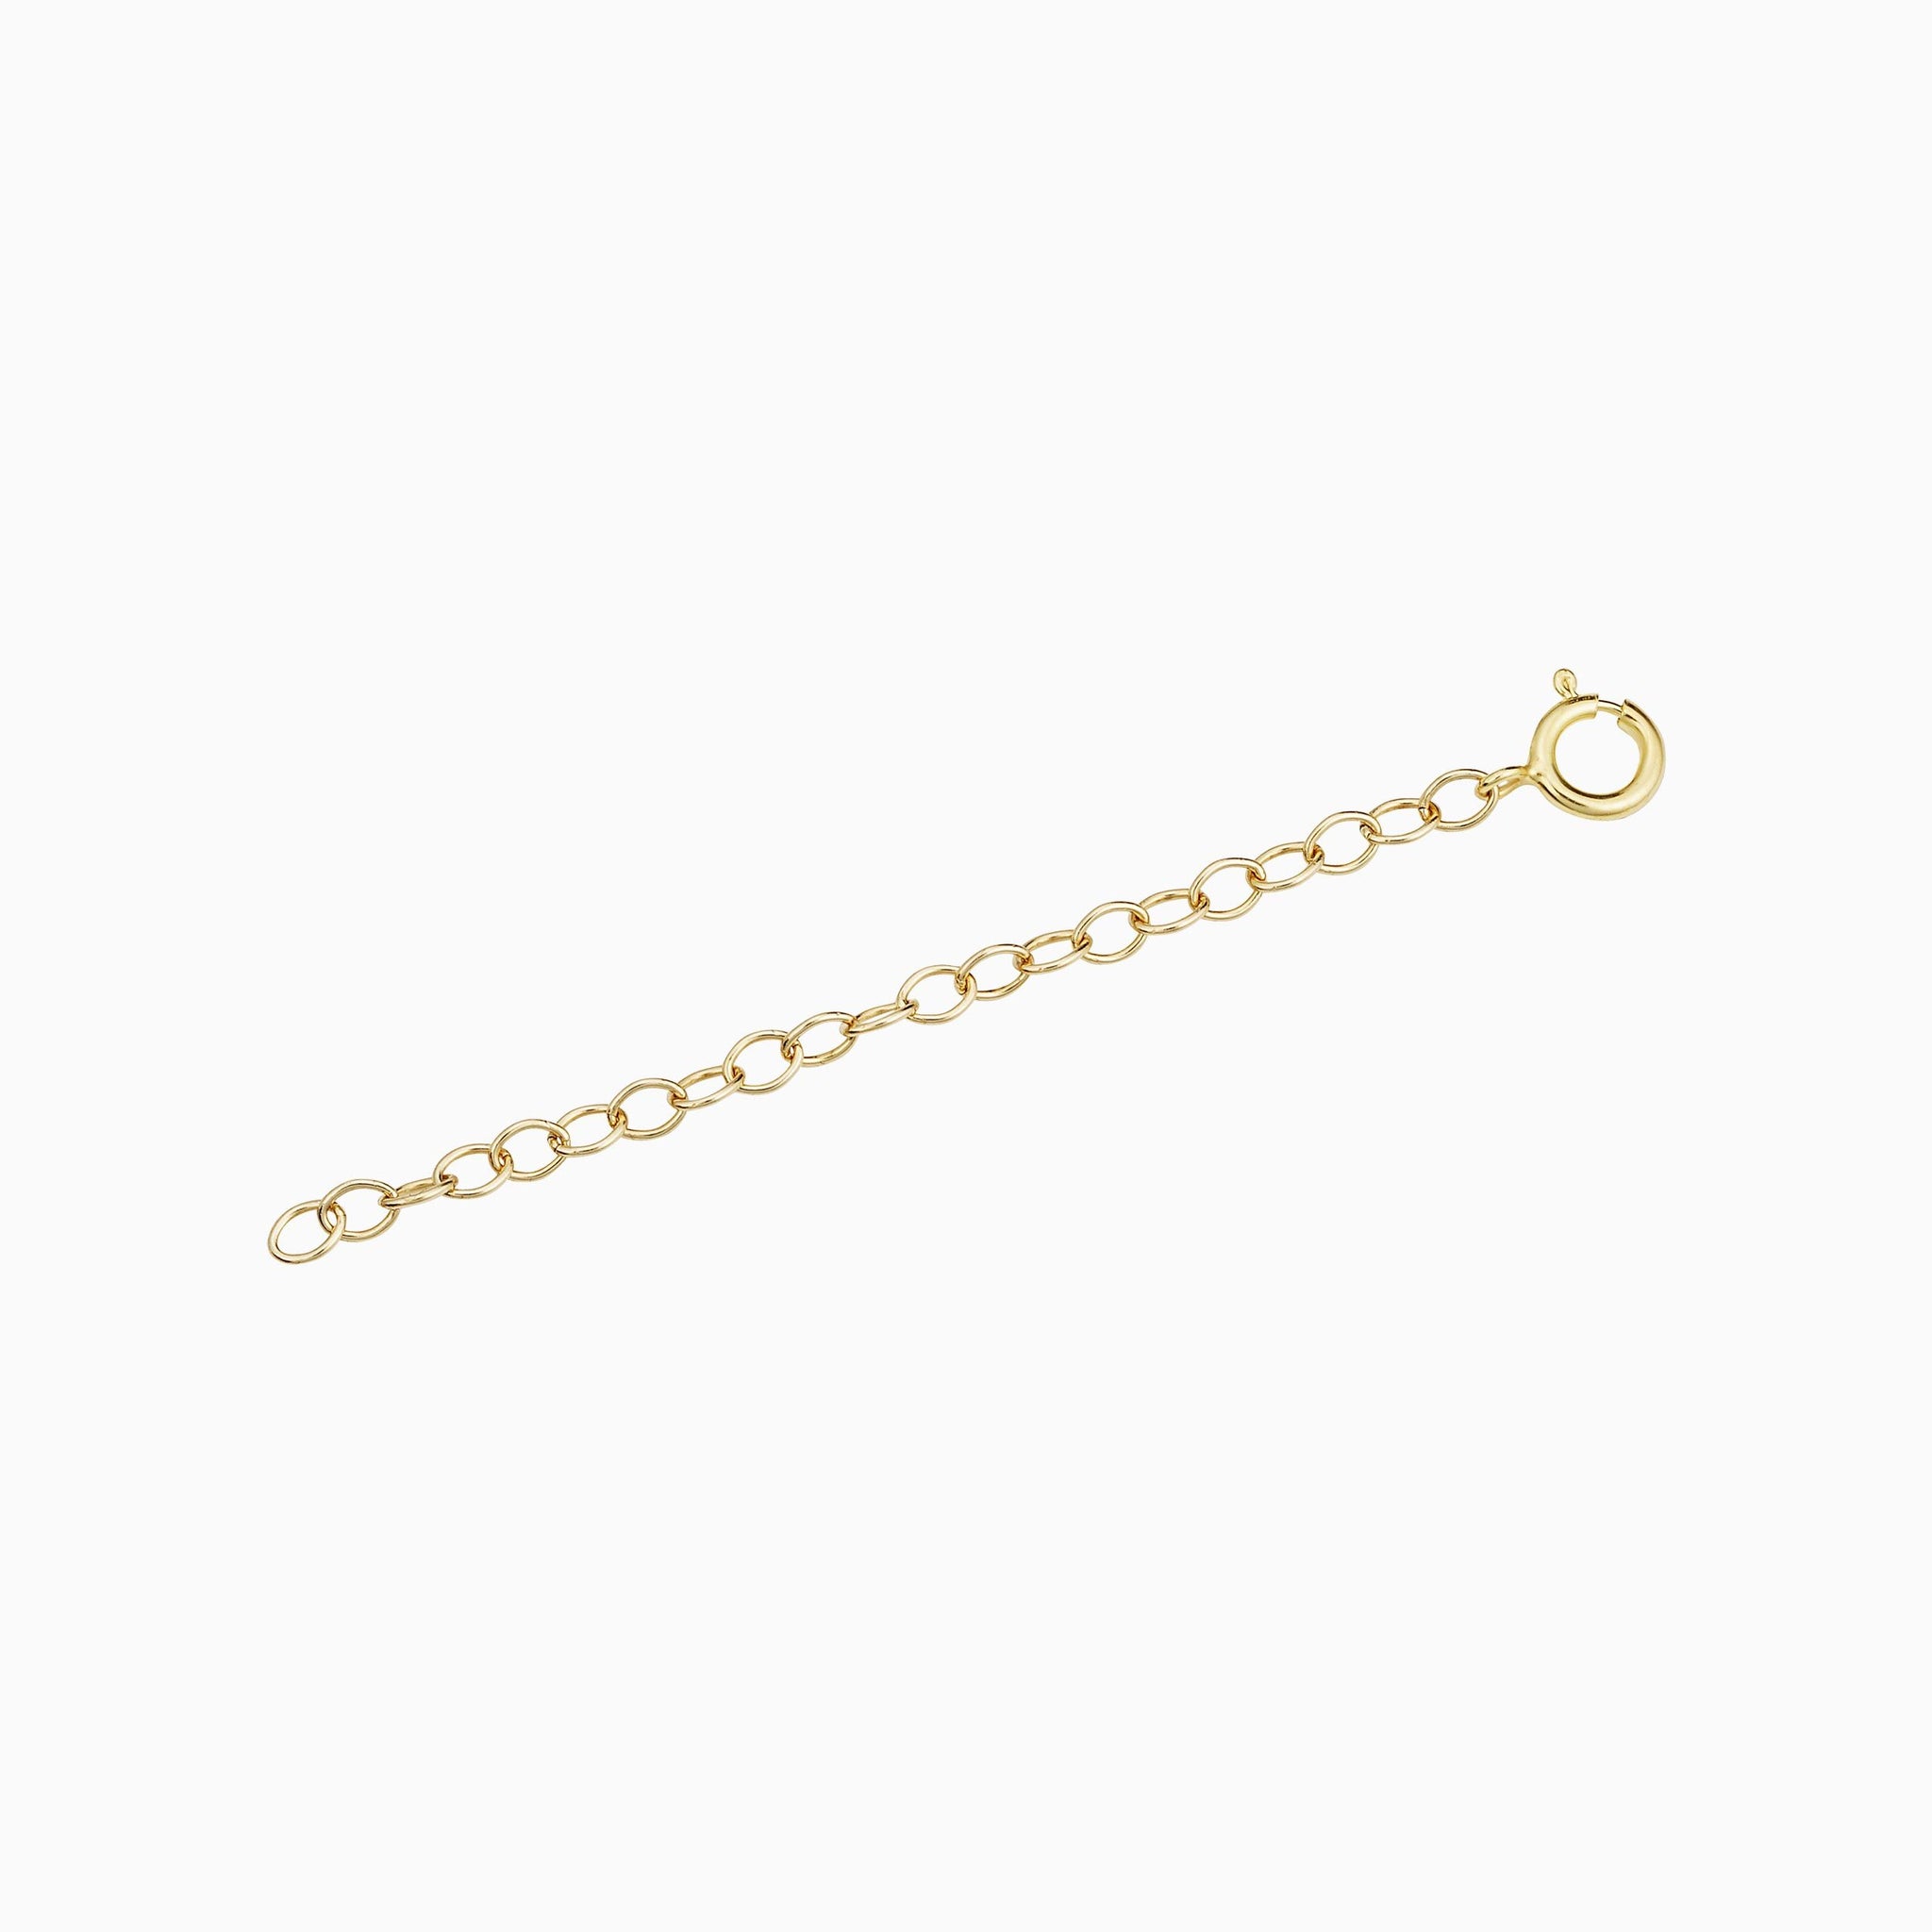 Lengthen It Chain Extender Rose Gold / 10K Solid Gold / 2 | Real Gold Jewelry by Oradina